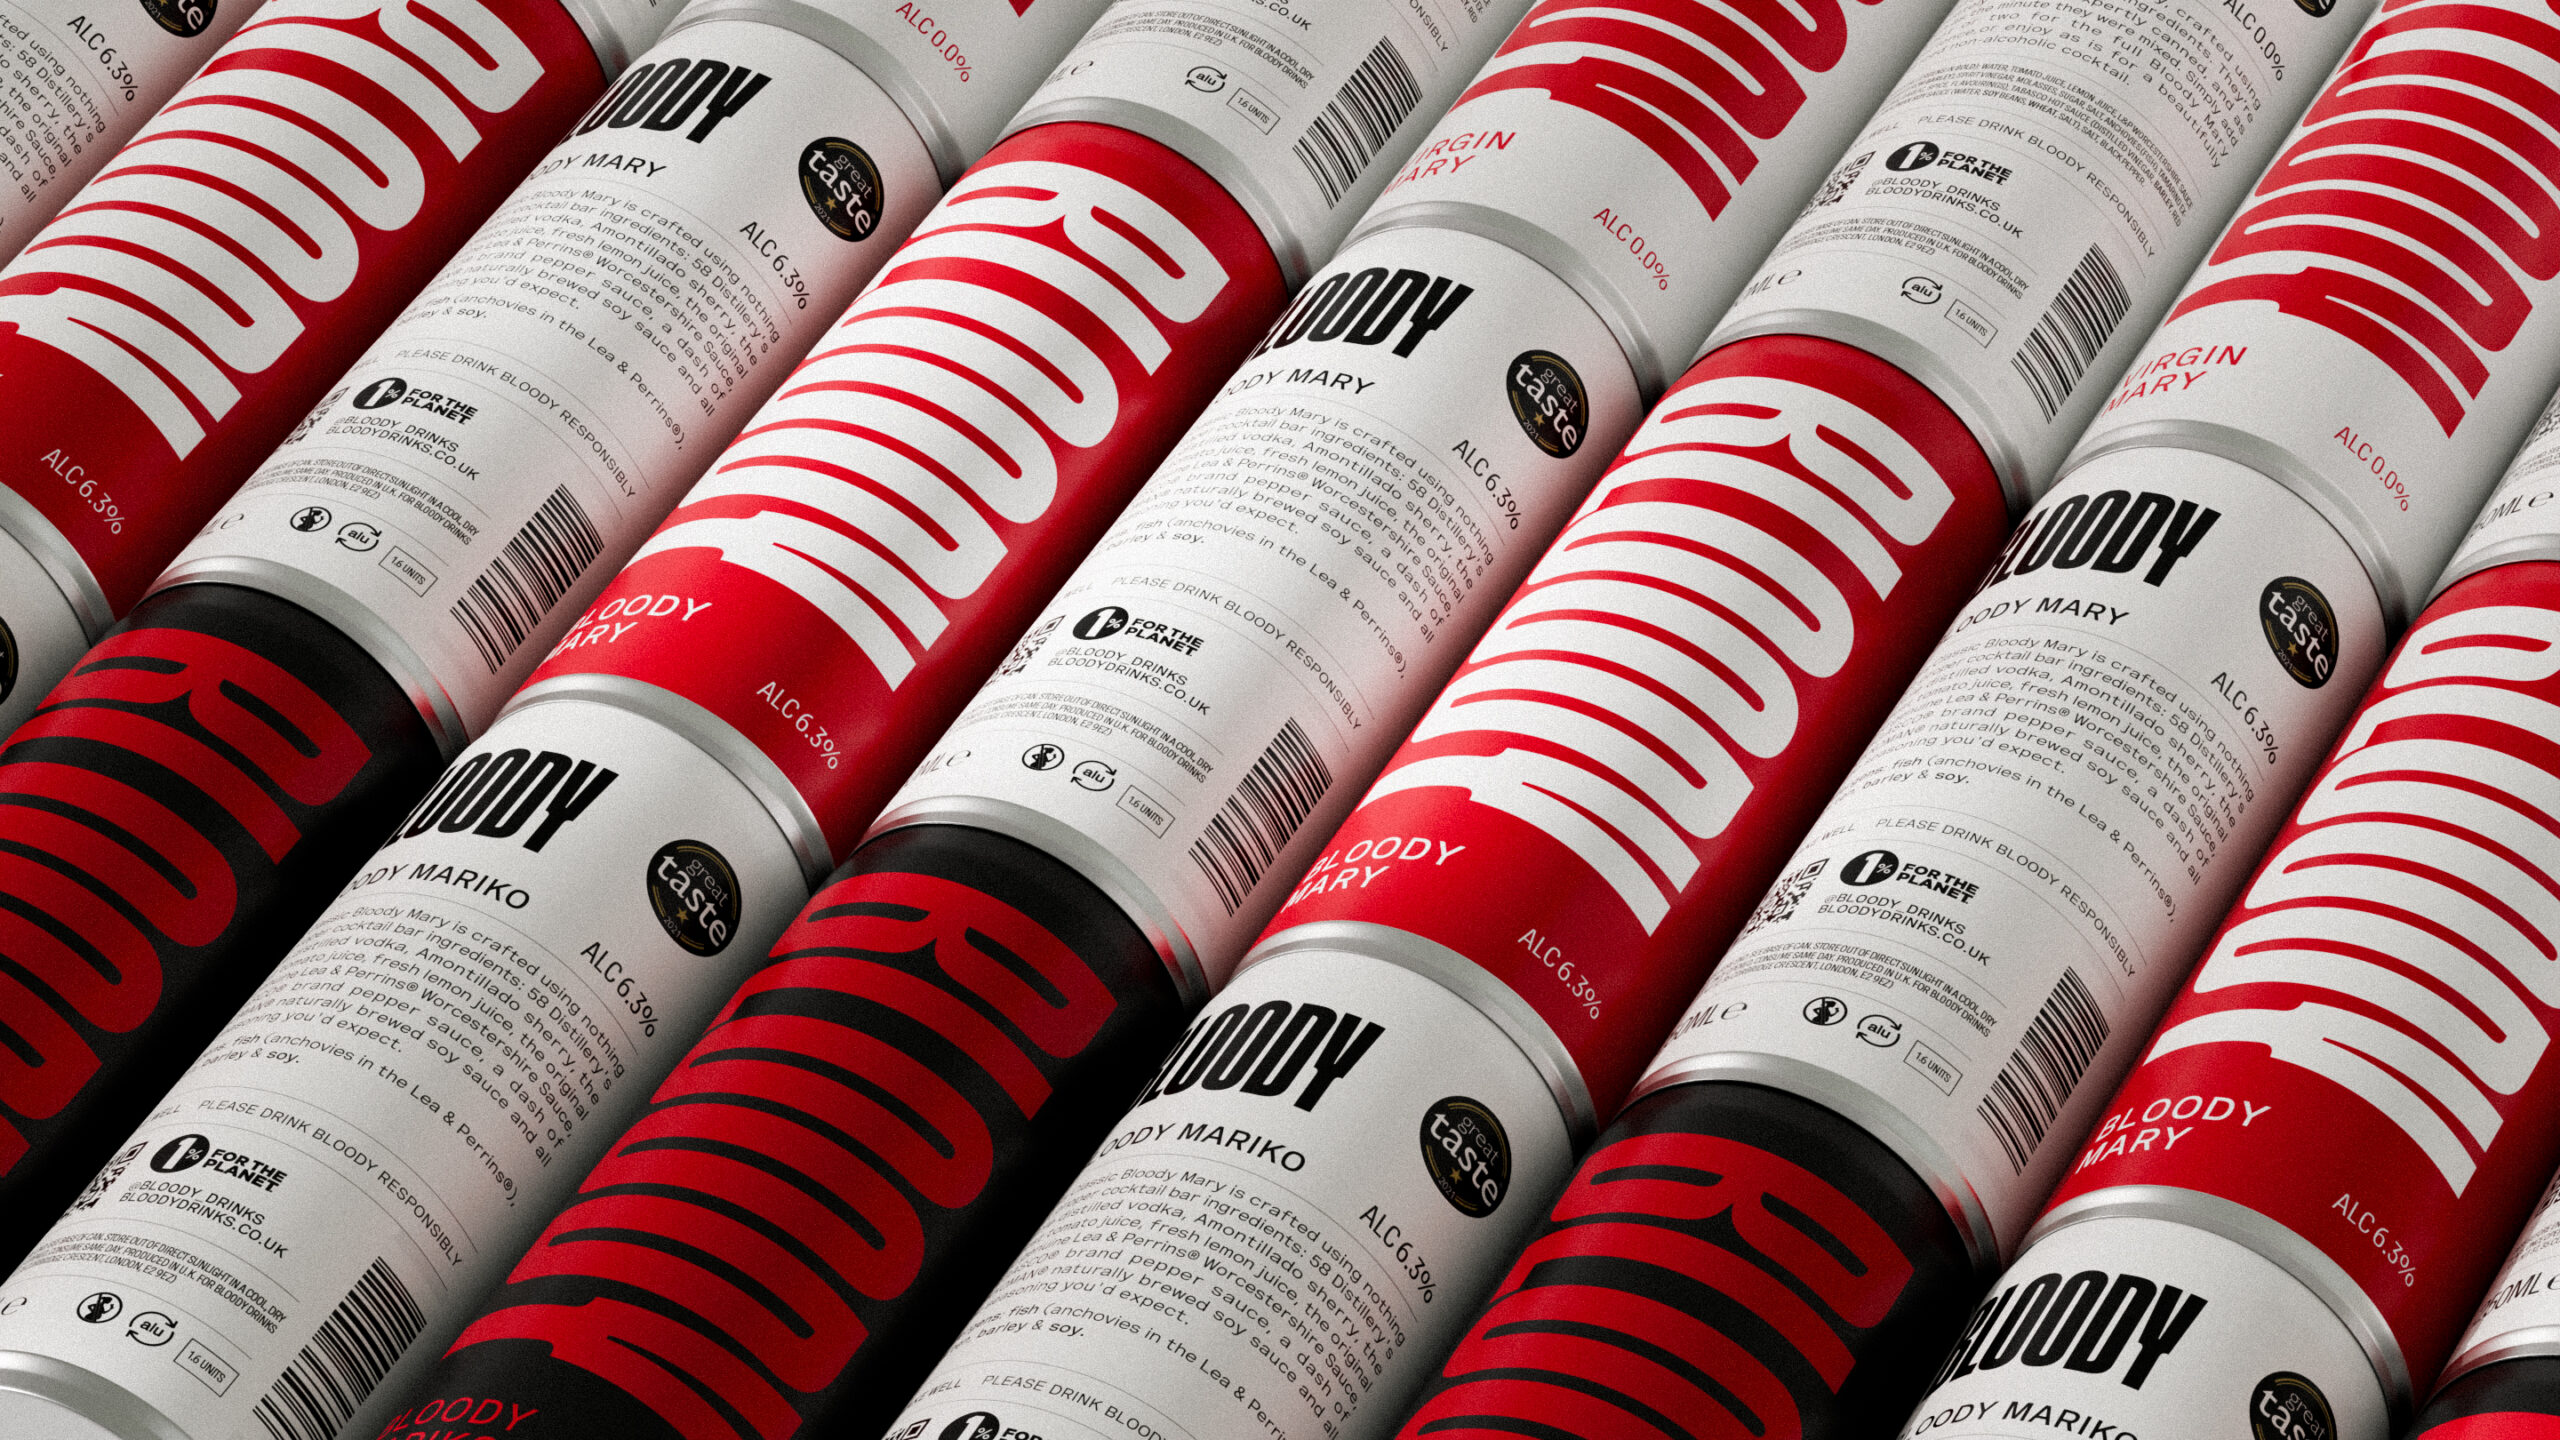 Bloody Drinks: Bold Packaging Design and Typography for a Striking Brand